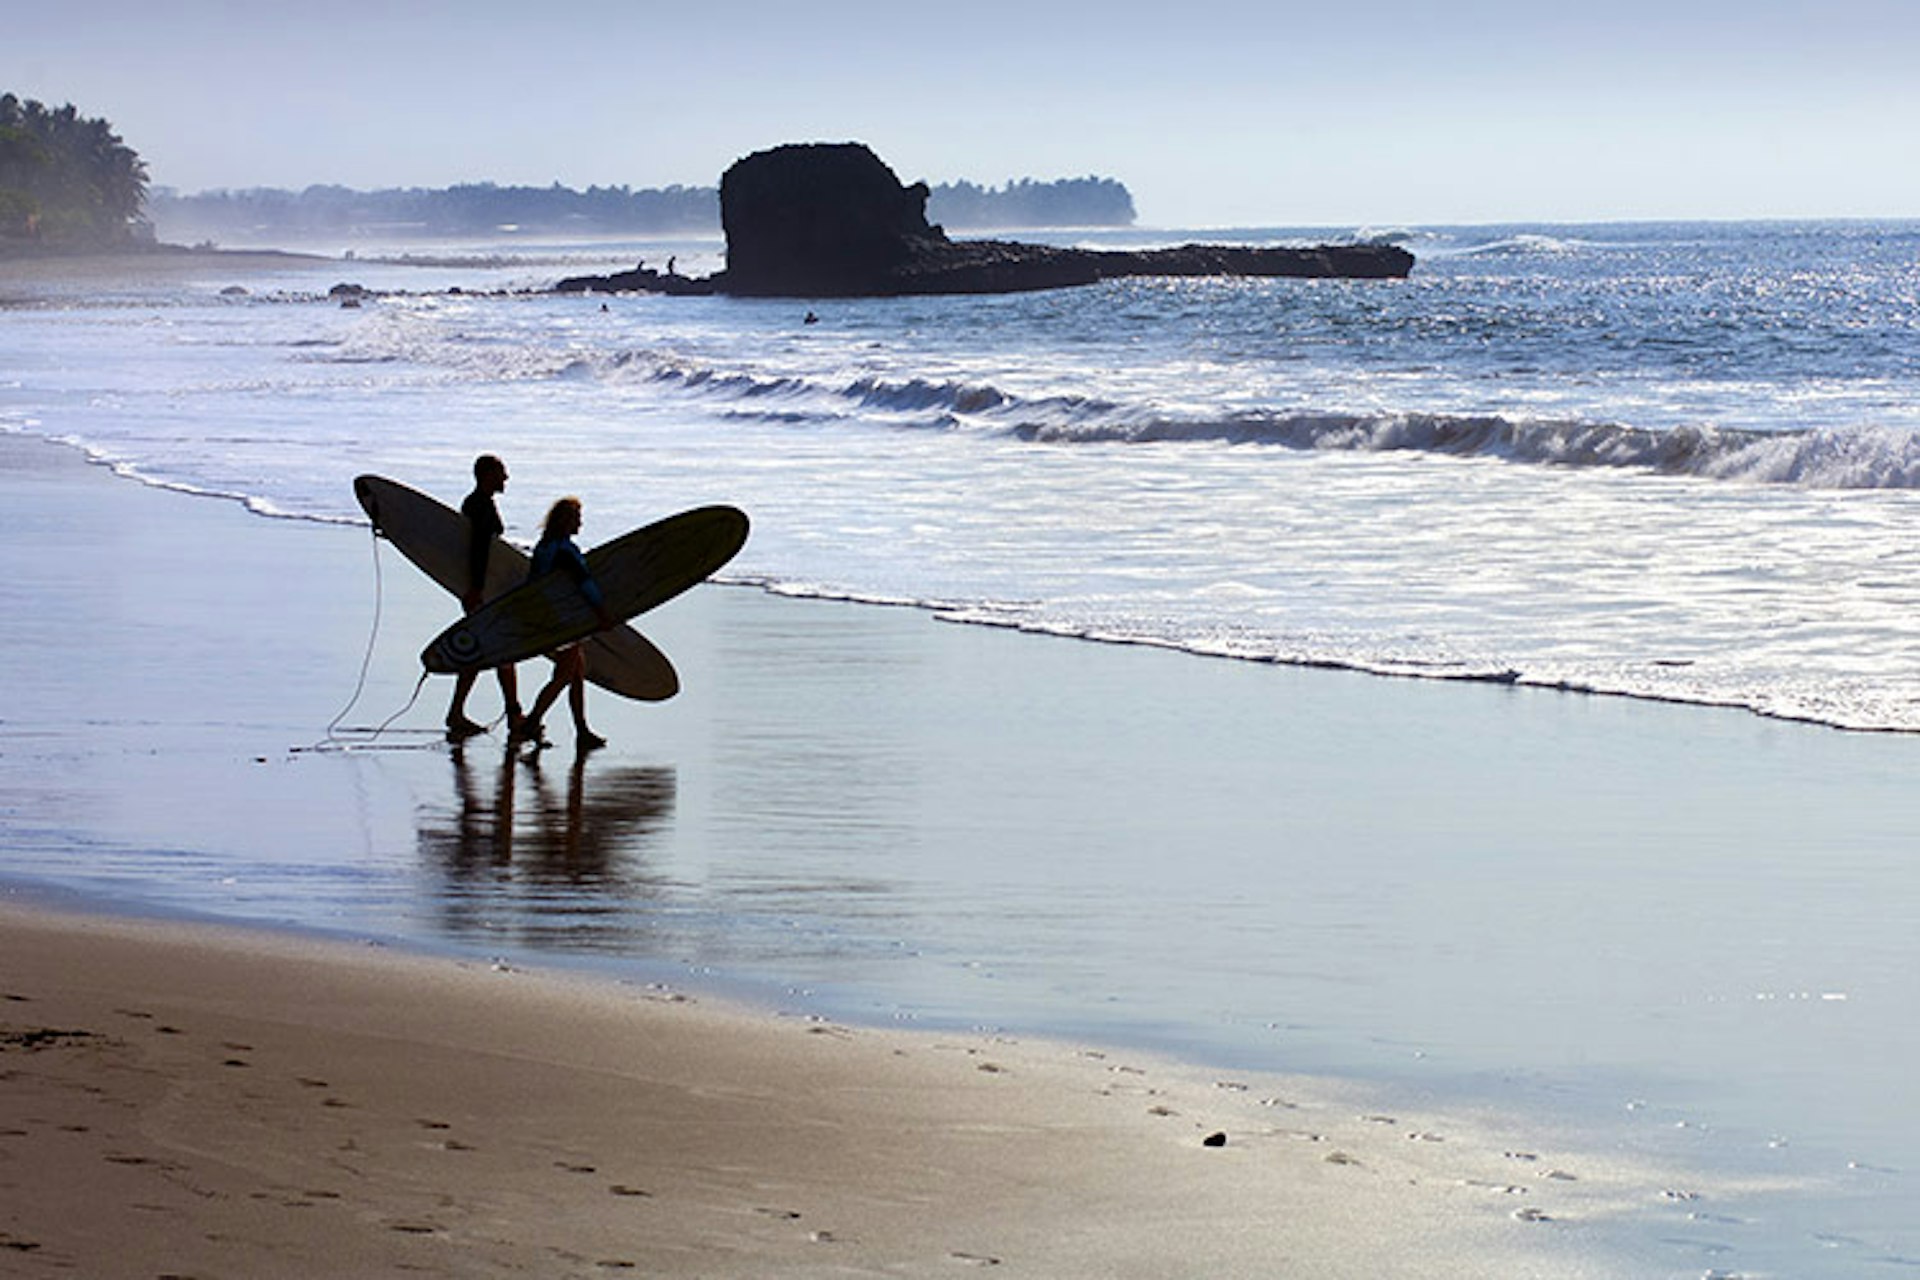 Surf's up at El Tunco, El Salvador, so do the deed and hit the beach. Image by John Coletti / AWL Images / Getty Images.